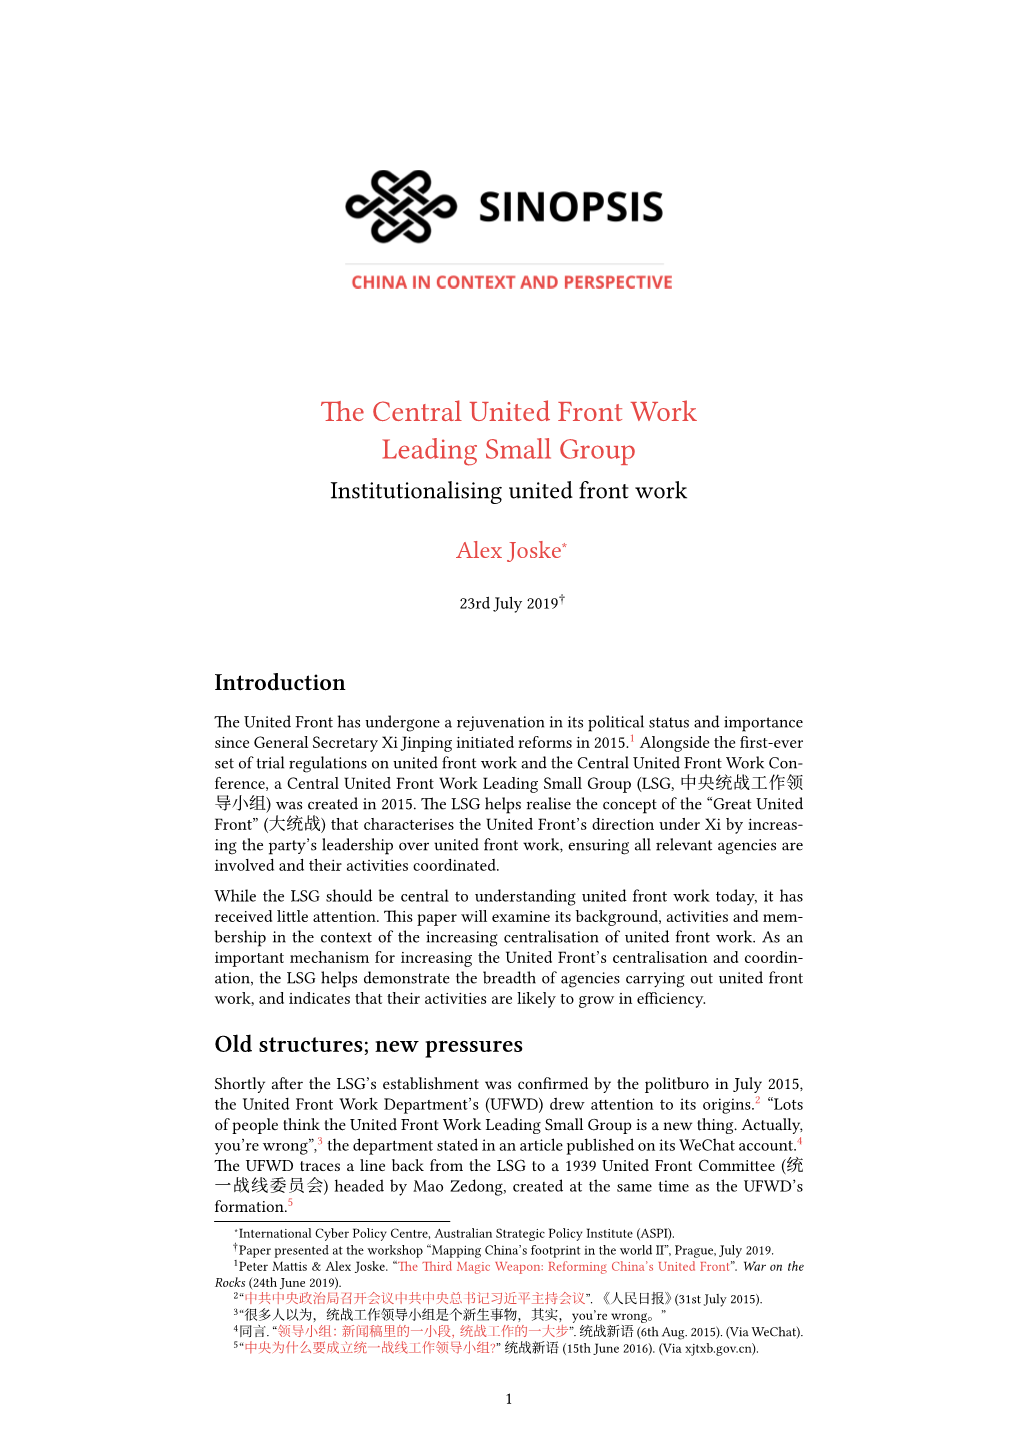 The Central United Front Work Leading Small Group Institutionalising United Front Work